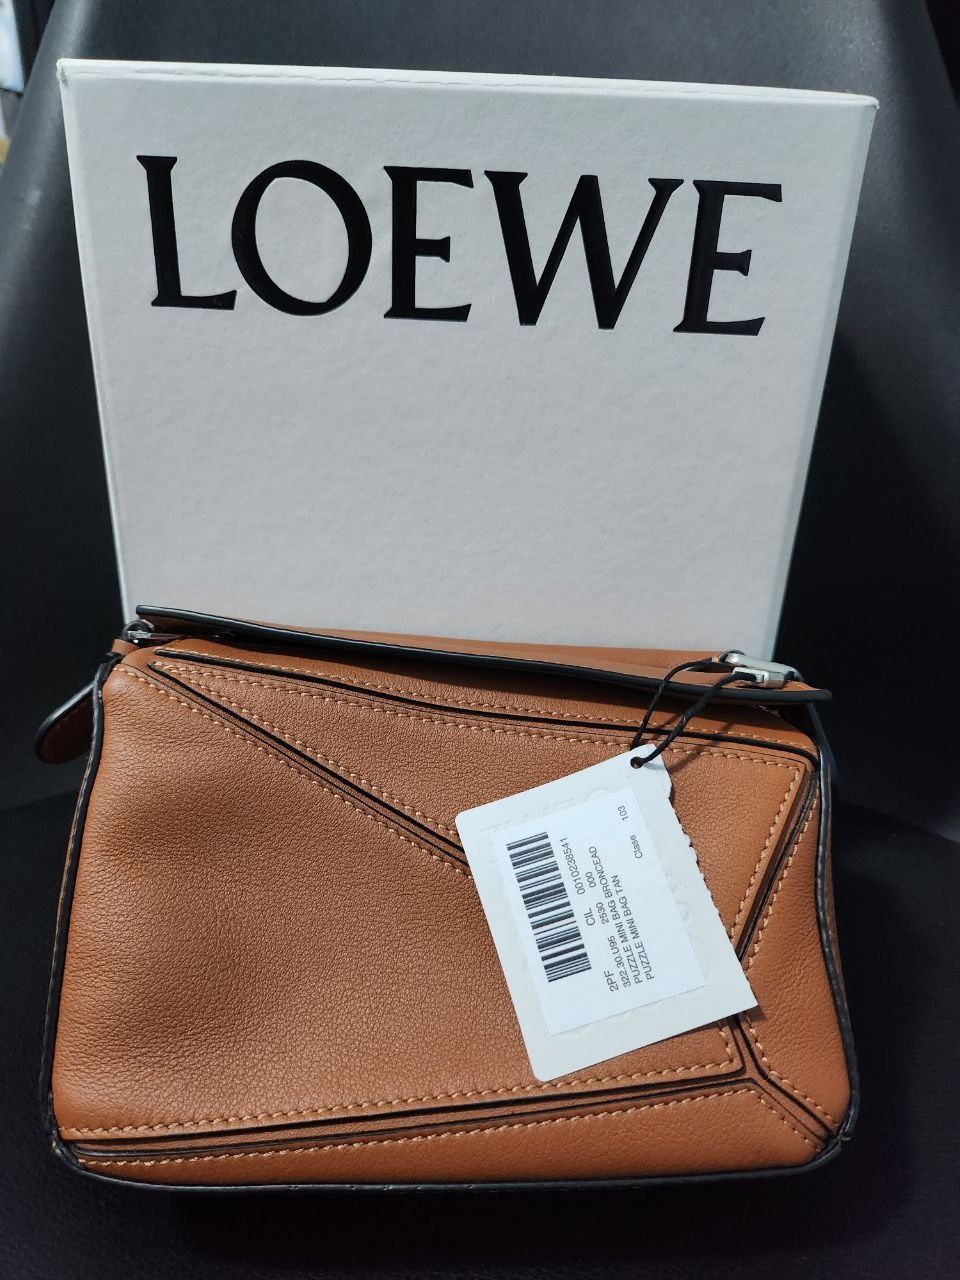 Smaller Than Small, Meet Loewe's New Mini a 16 Square Bag